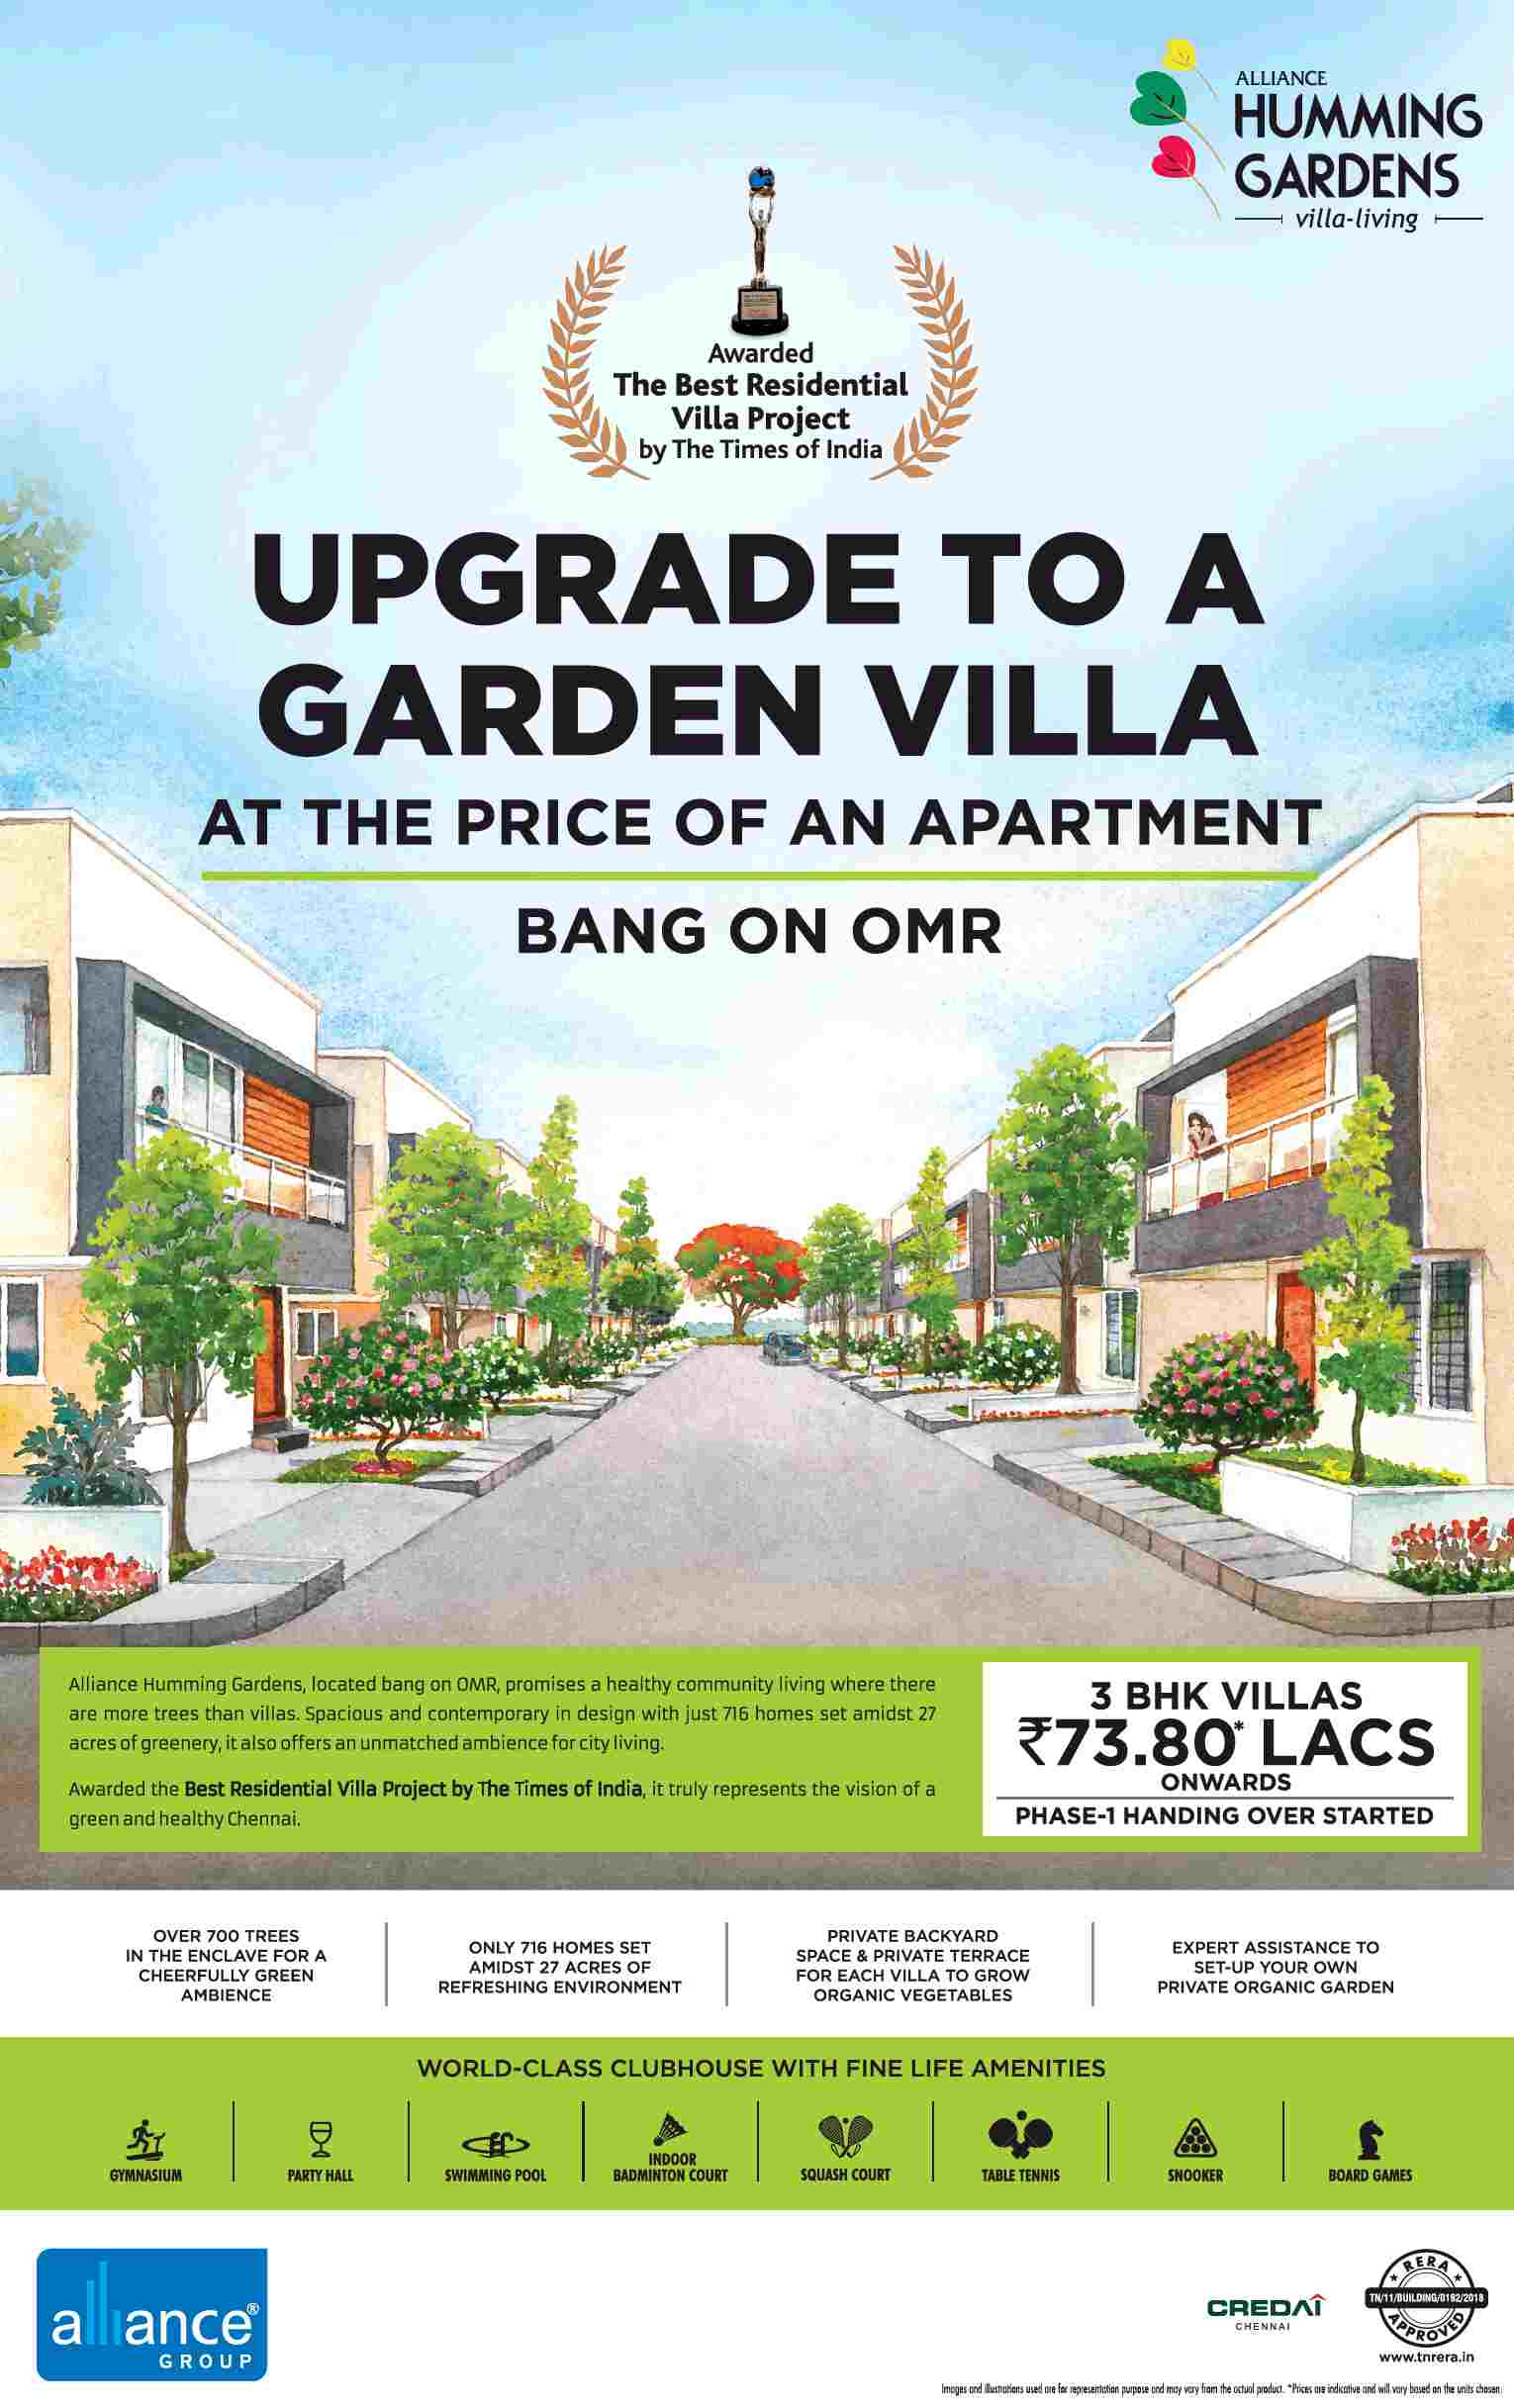 Own 3 BHK villas @ Rs 73.80 Lacs at Alliance Humming Gardens in Chennai Update